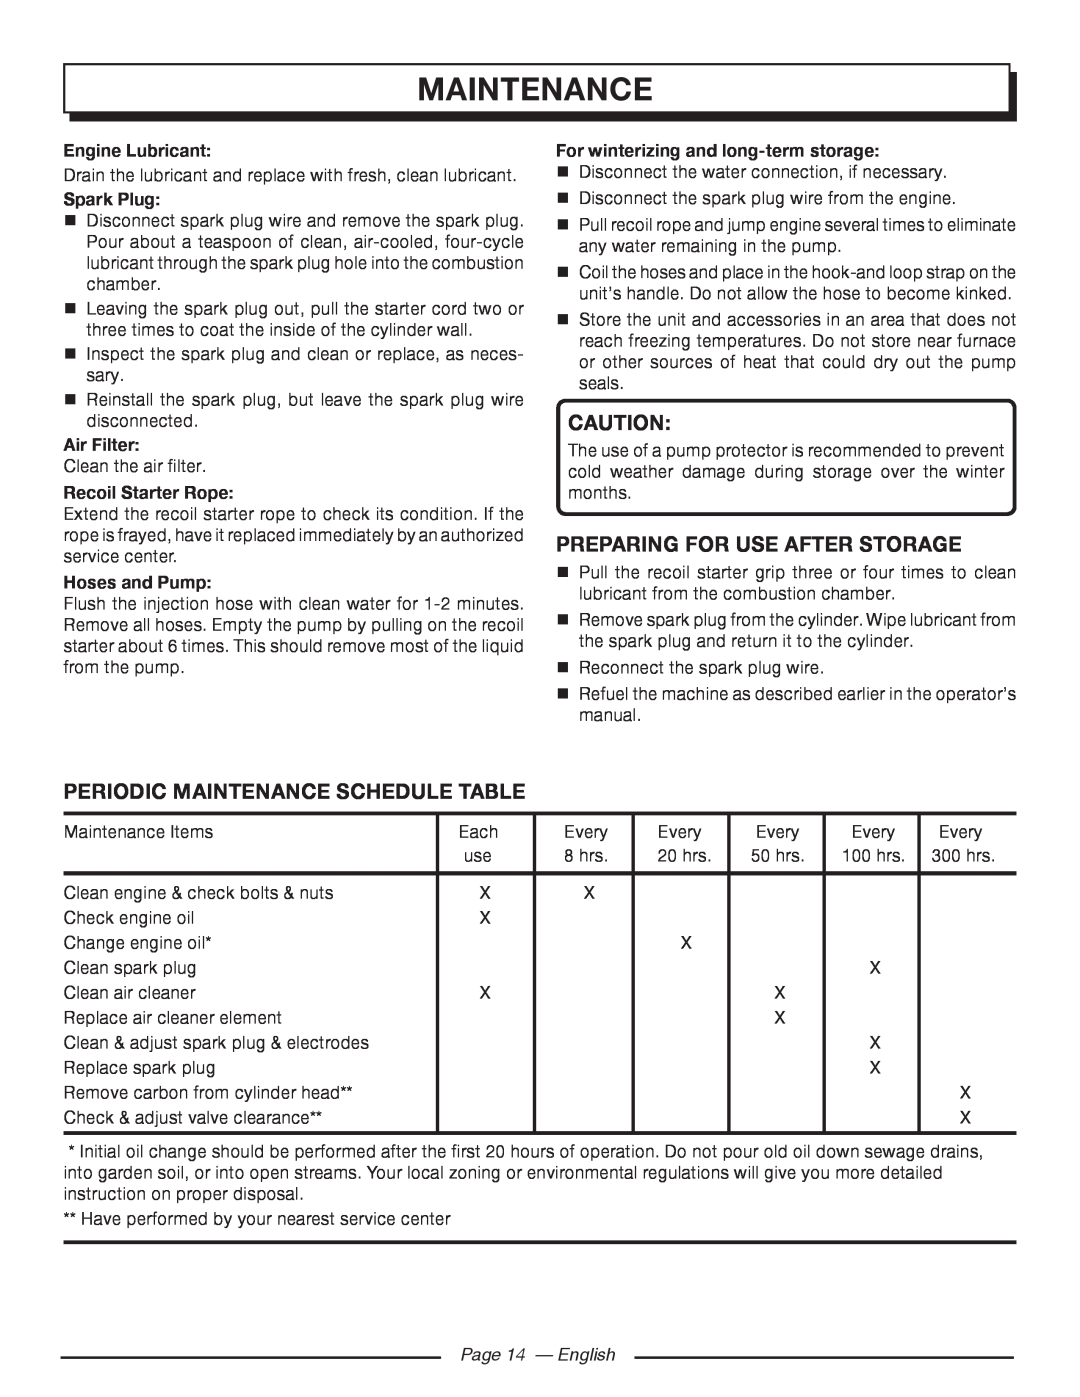 Homelite UT80977 Preparing For Use After Storage, Periodic Maintenance Schedule Table, Page 14 - English, Engine Lubricant 